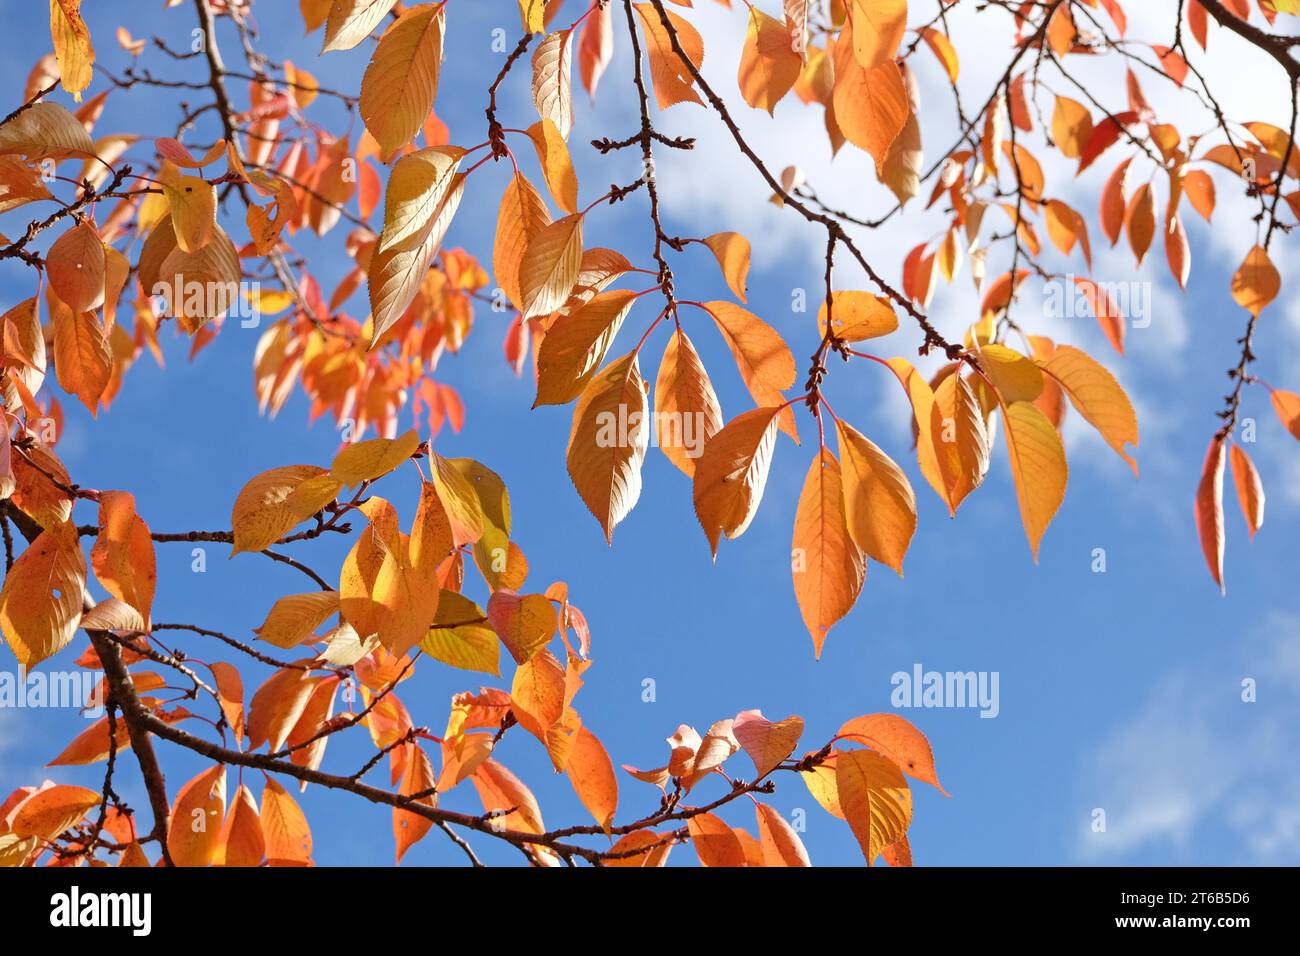 The orange and yellow autumn leaves of the Prunus yedoensis, also known as a Yoshino cherry tree. Stock Photo